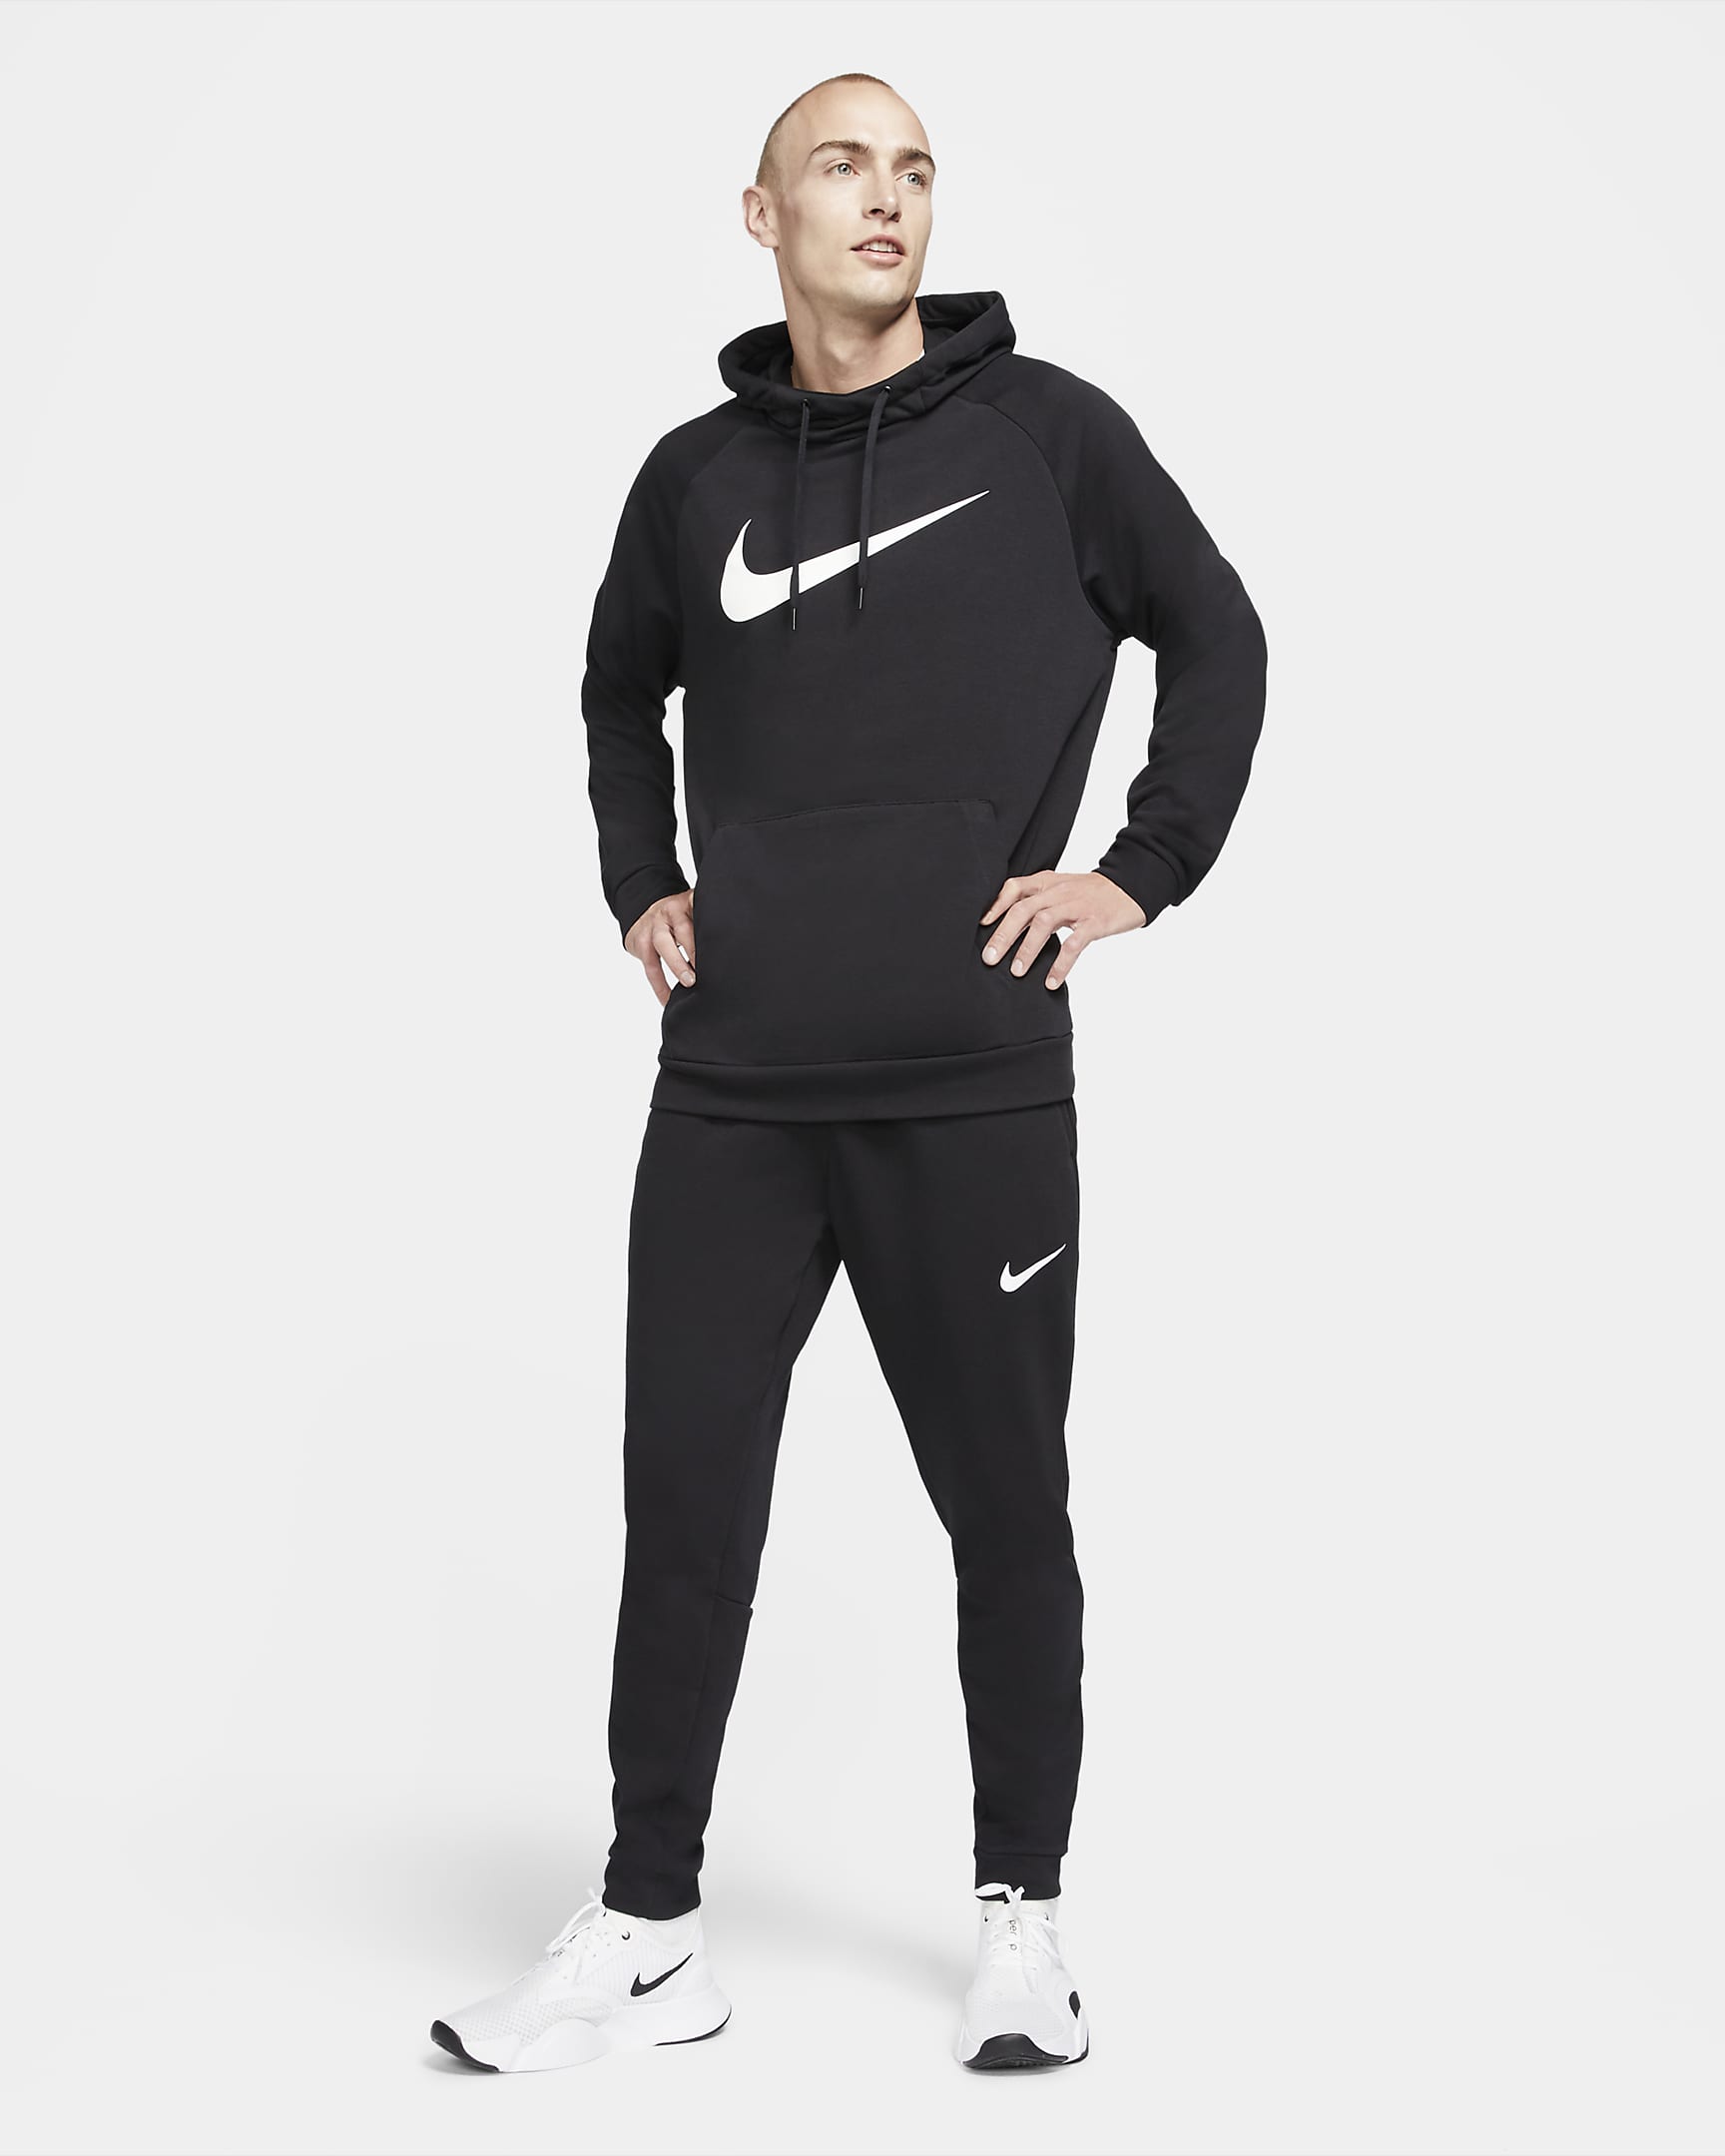 Nike Dry Graphic Men's Dri-FIT Hooded Fitness Pullover Hoodie - Black/White